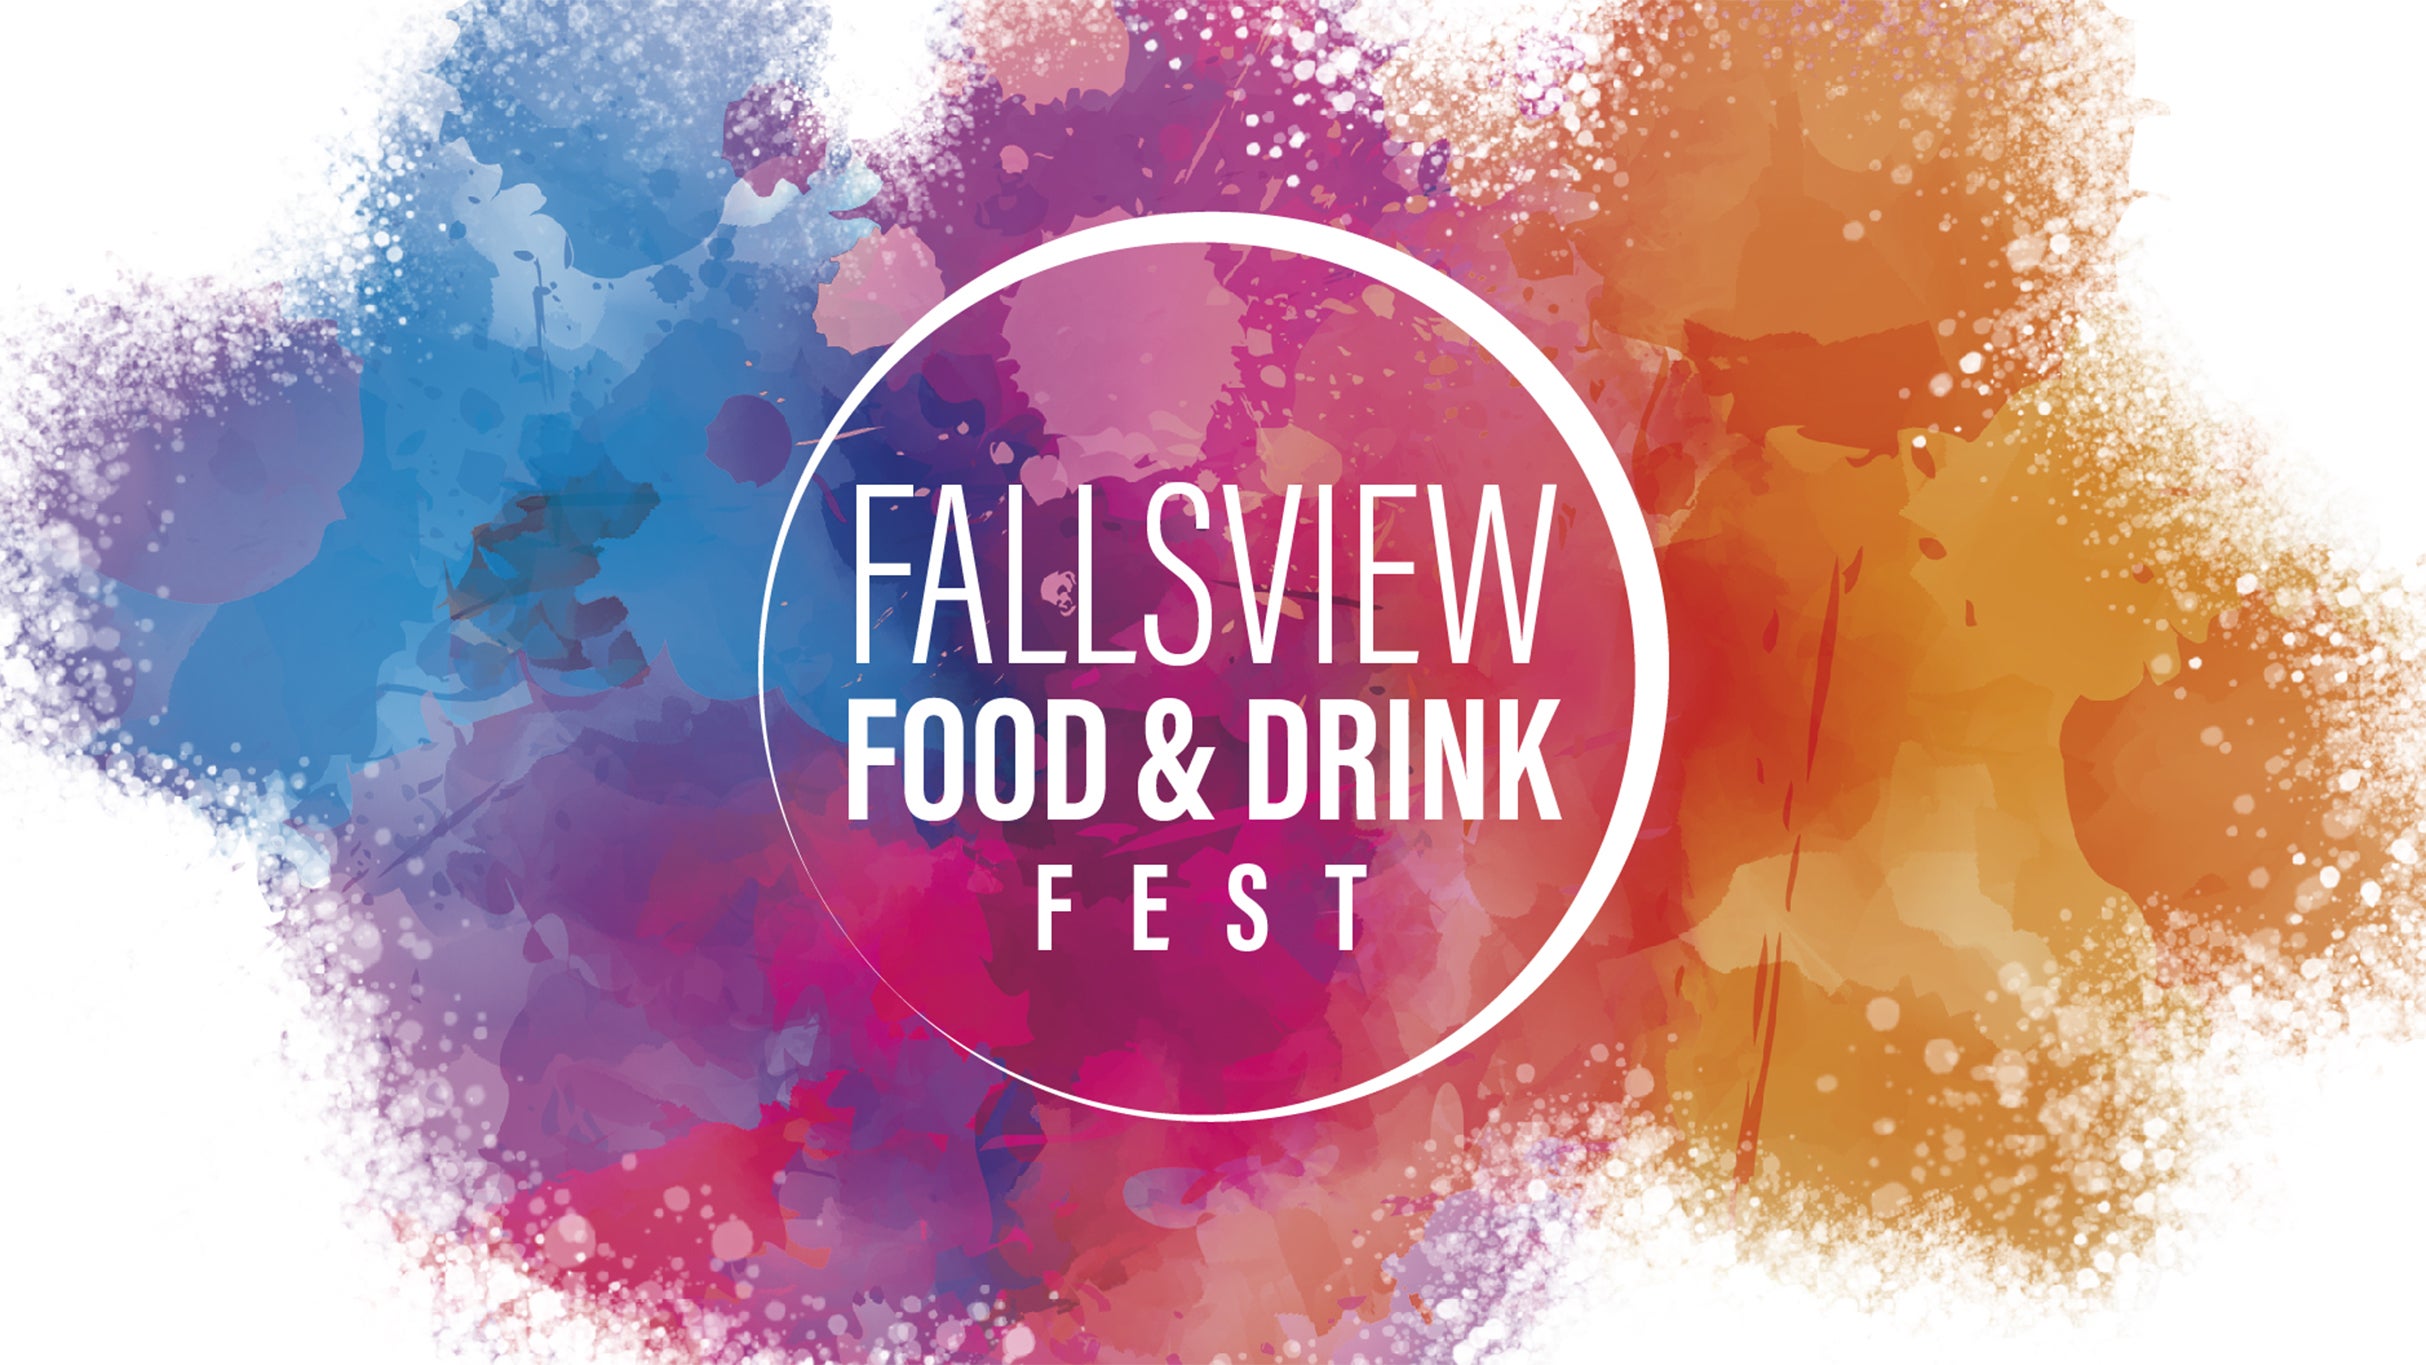 Fallsview Food & Drink Fest - Brunch With Mary Berg presales in Niagara Falls